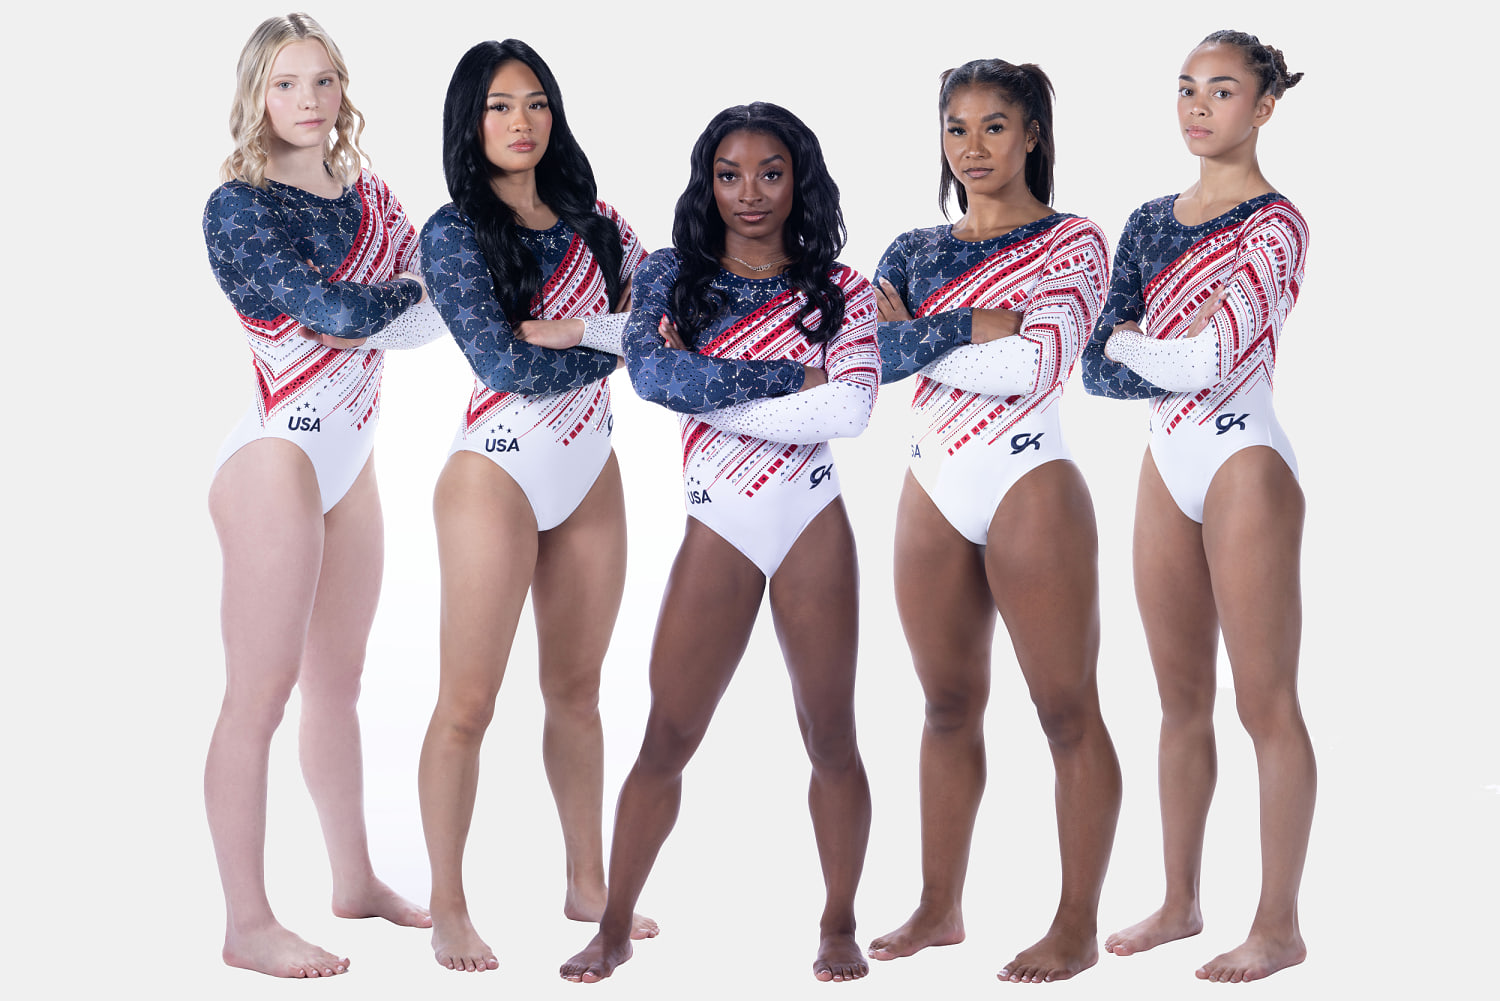 Olympic gymnastics: A sneak peek at the leotards Simone Biles and Team USA will wear in Paris